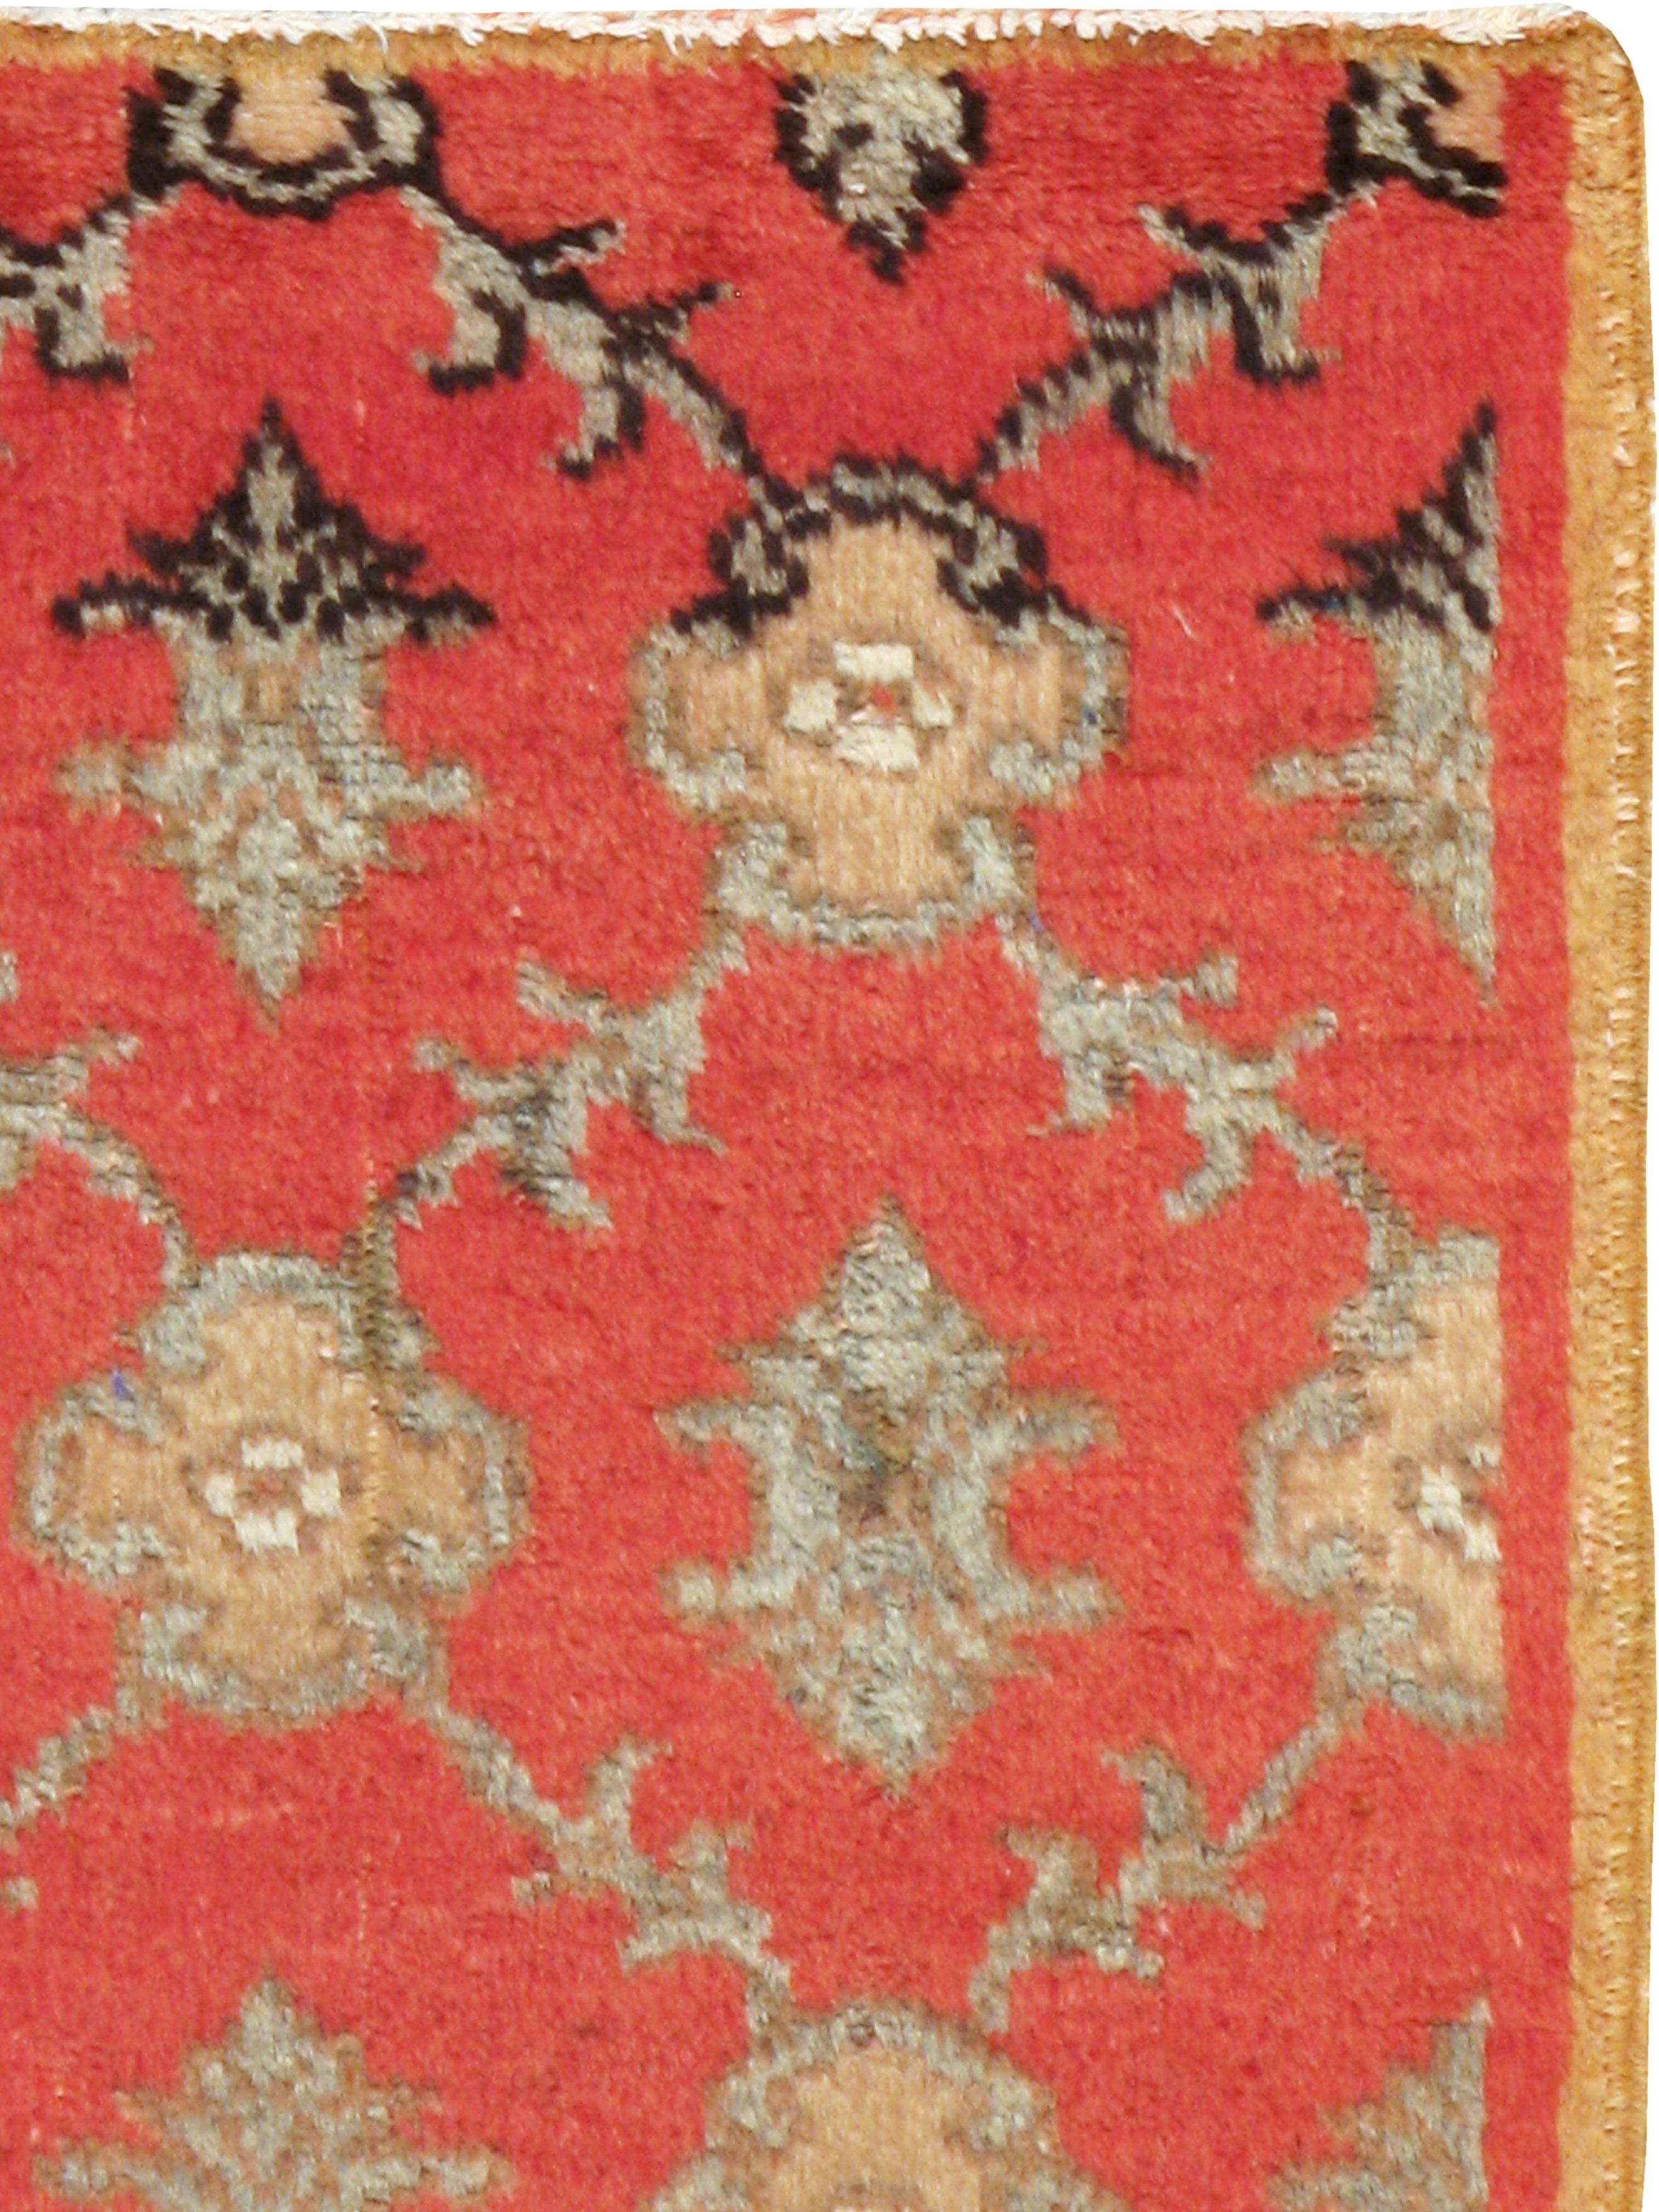 A vintage Turkish Anatolian rug from the mid-20th century.

Measures: 2' 1